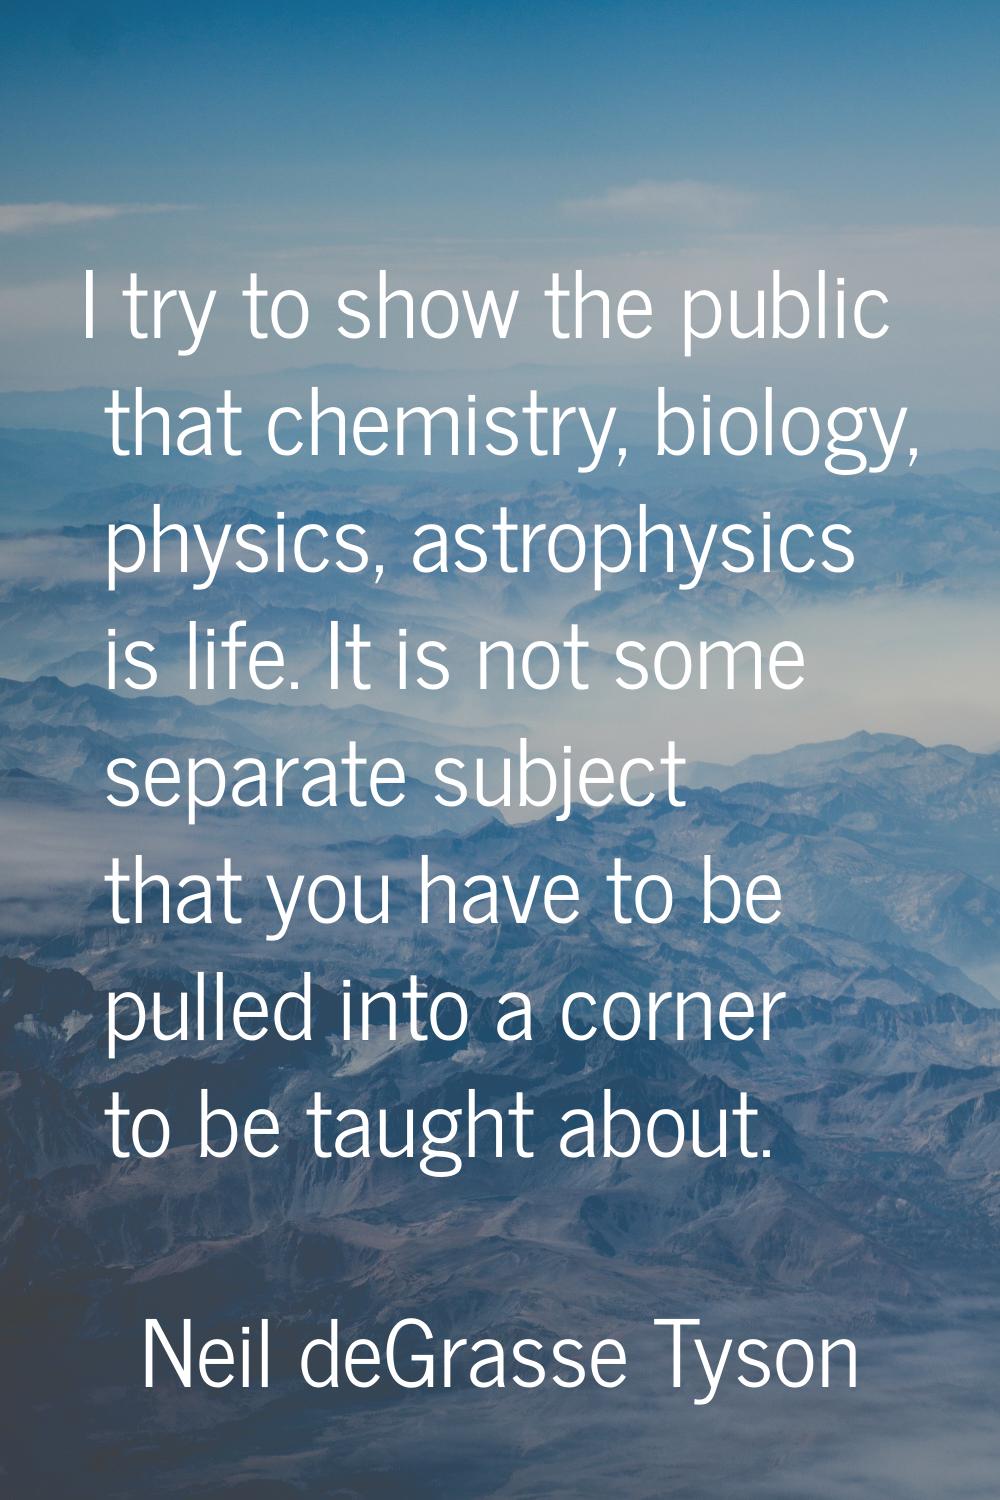 I try to show the public that chemistry, biology, physics, astrophysics is life. It is not some sep